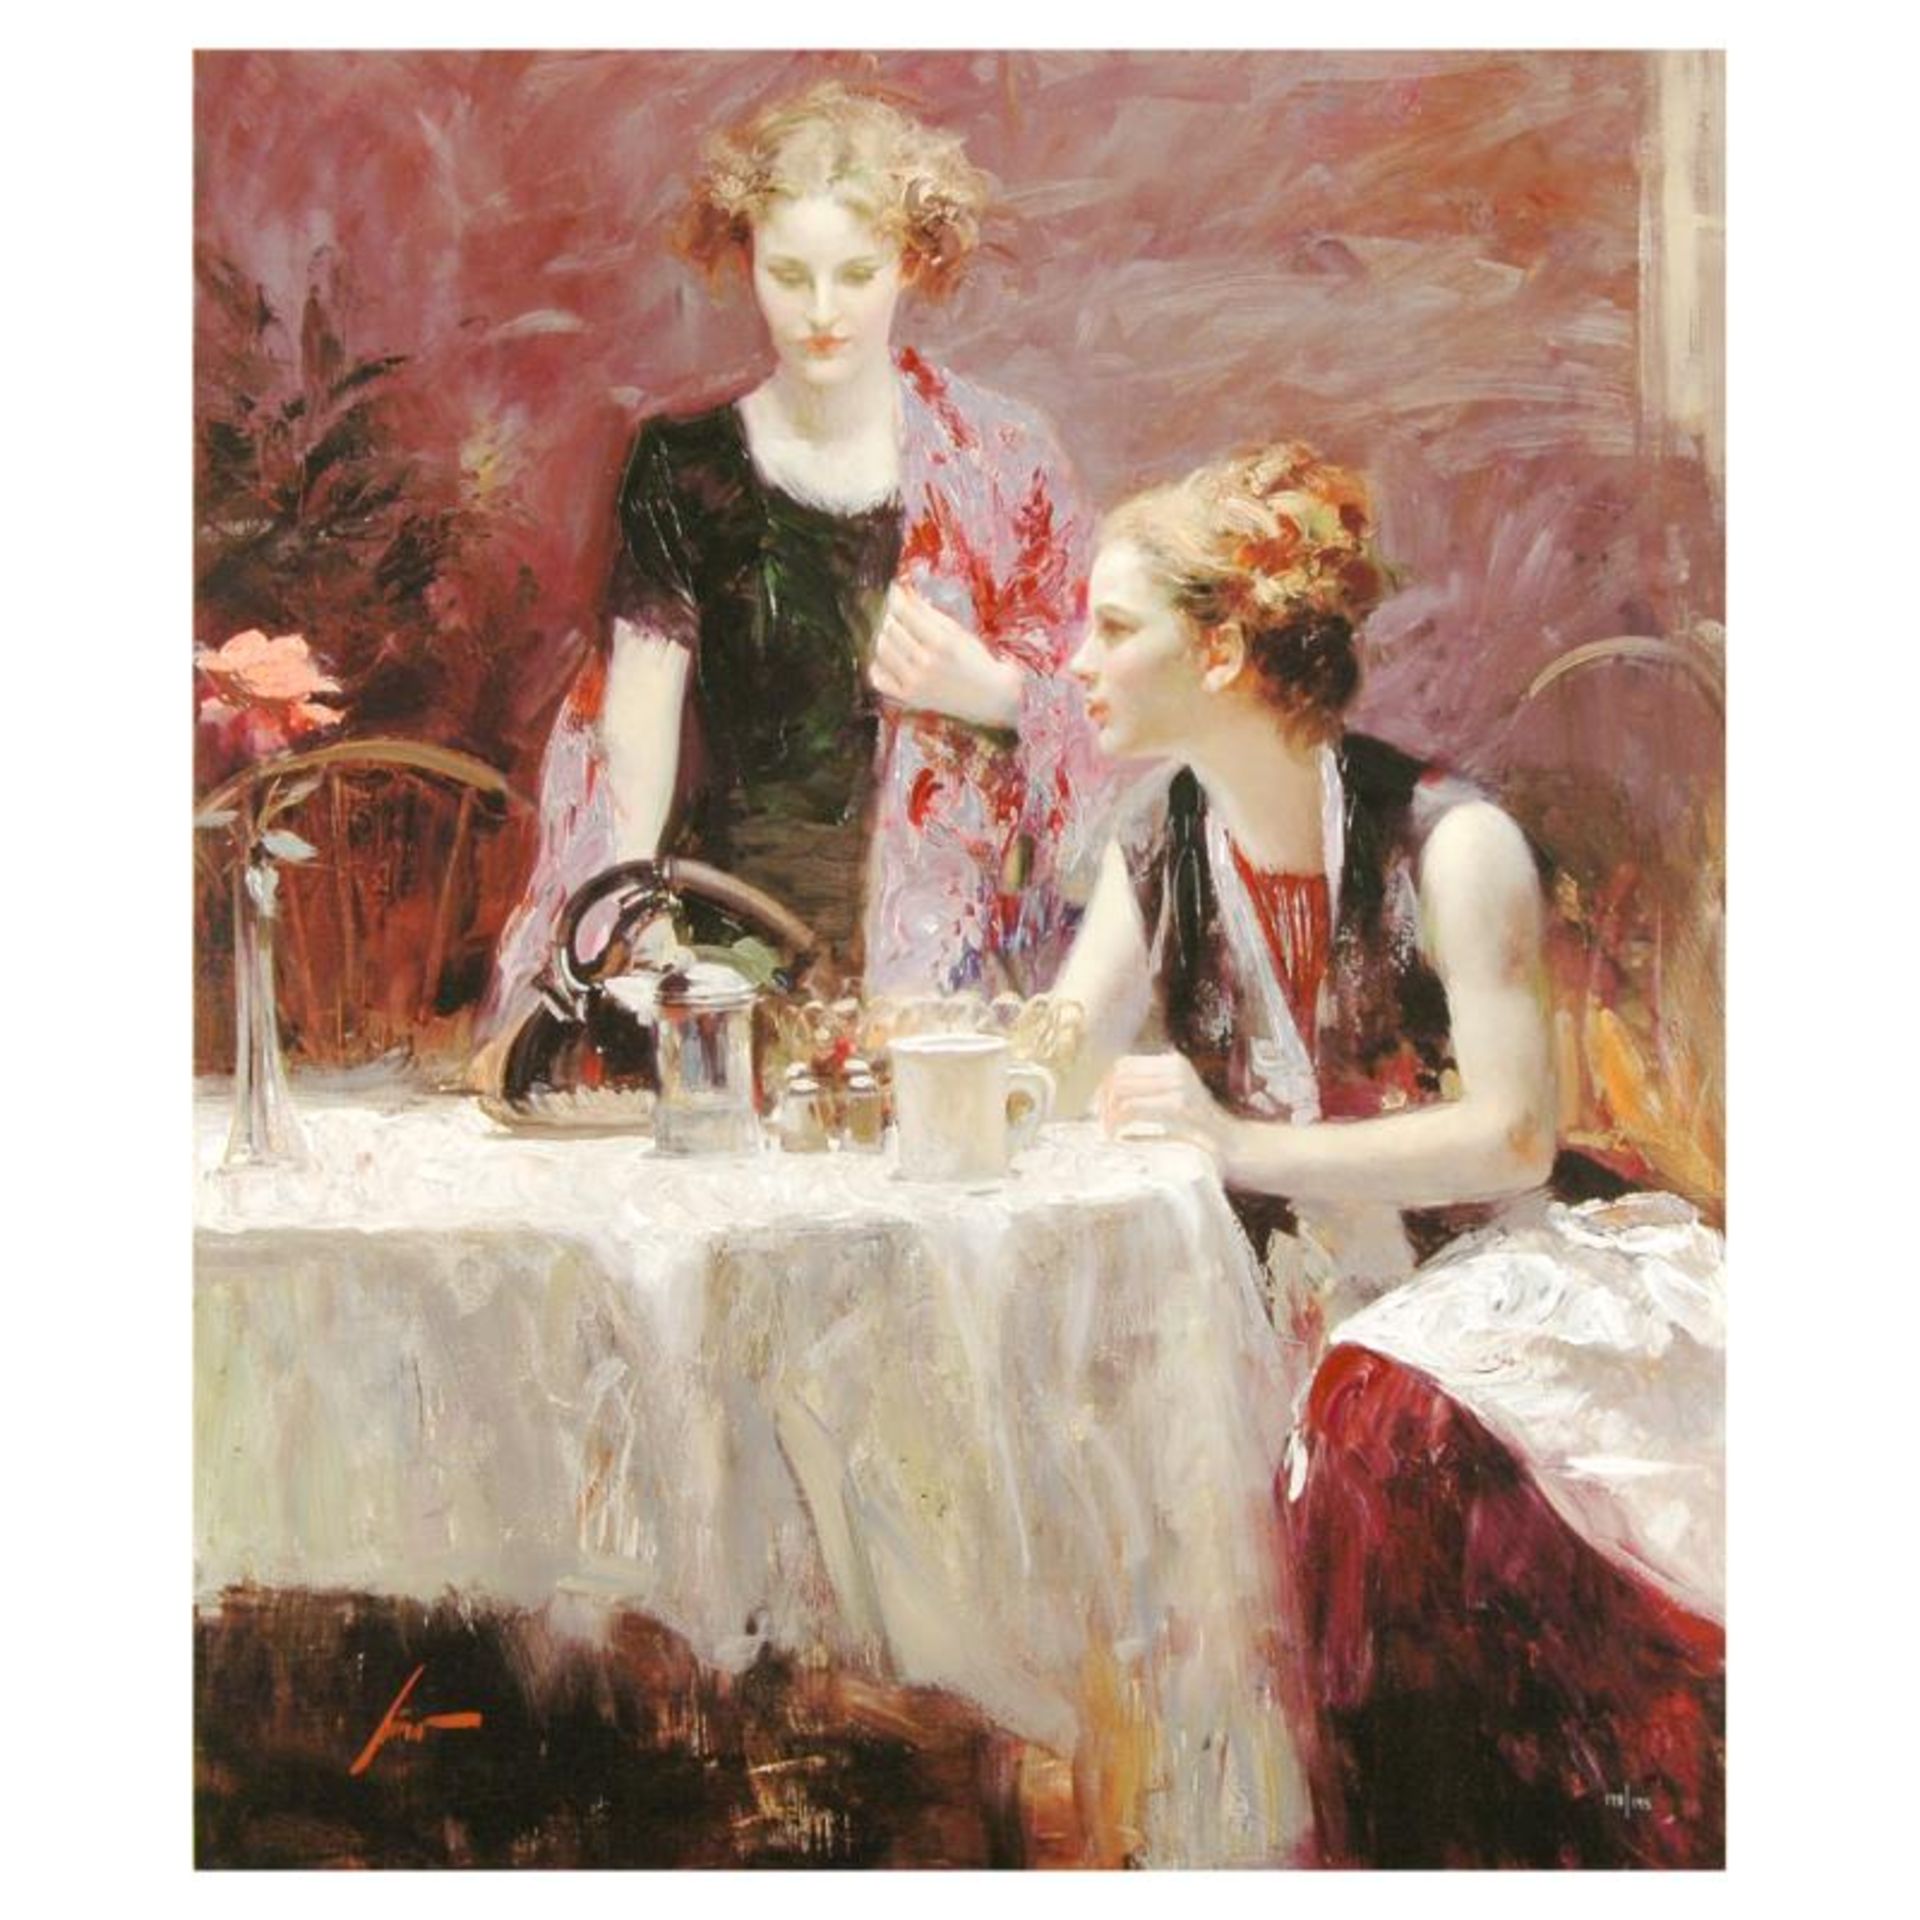 Pino (1931-2010), "After Dinner" Limited Edition on Canvas, Numbered and Hand Si